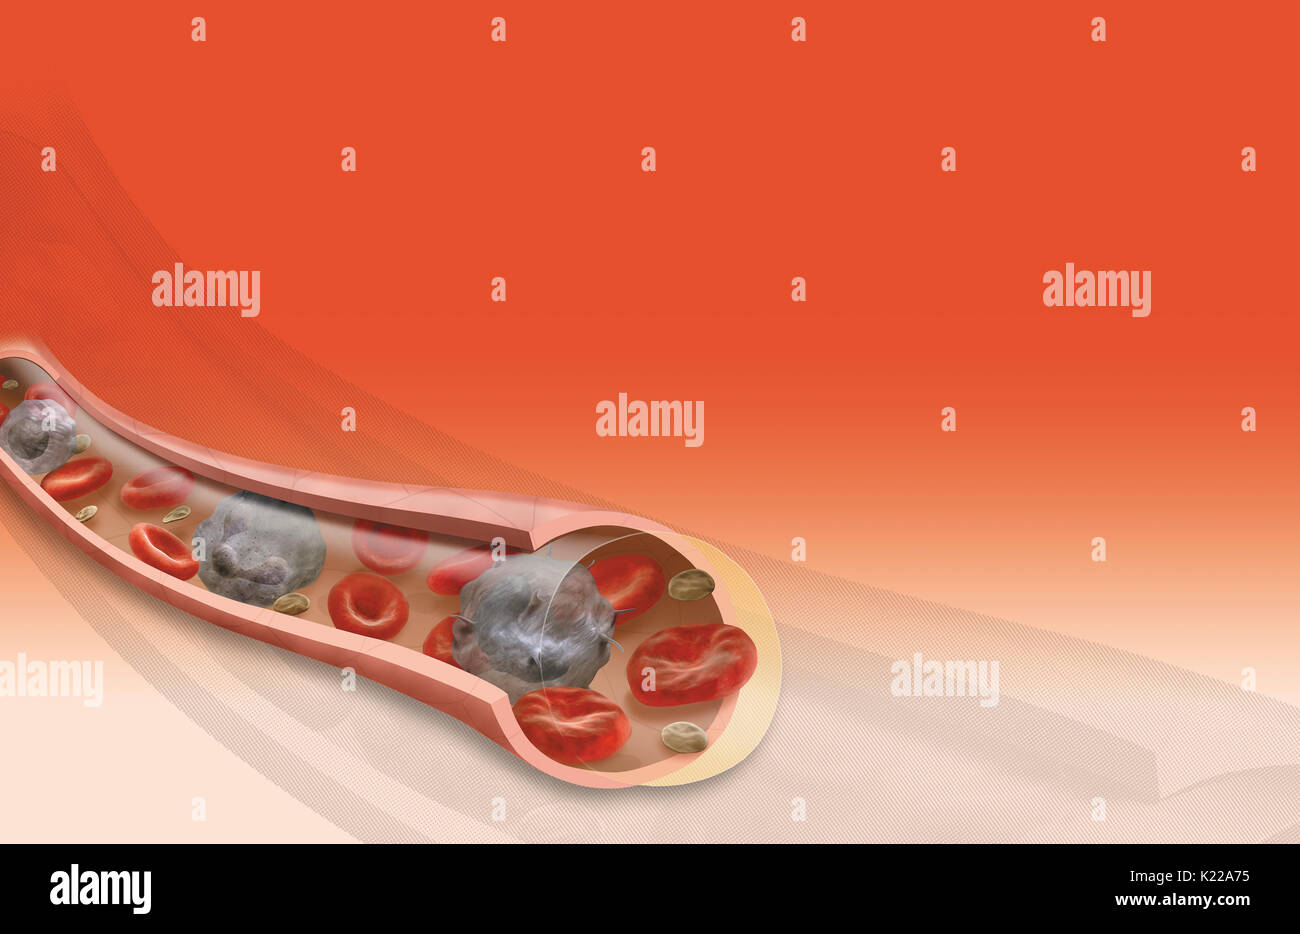 Channel through which blood circulates; there are arteries, capillaries and veins. Stock Photo